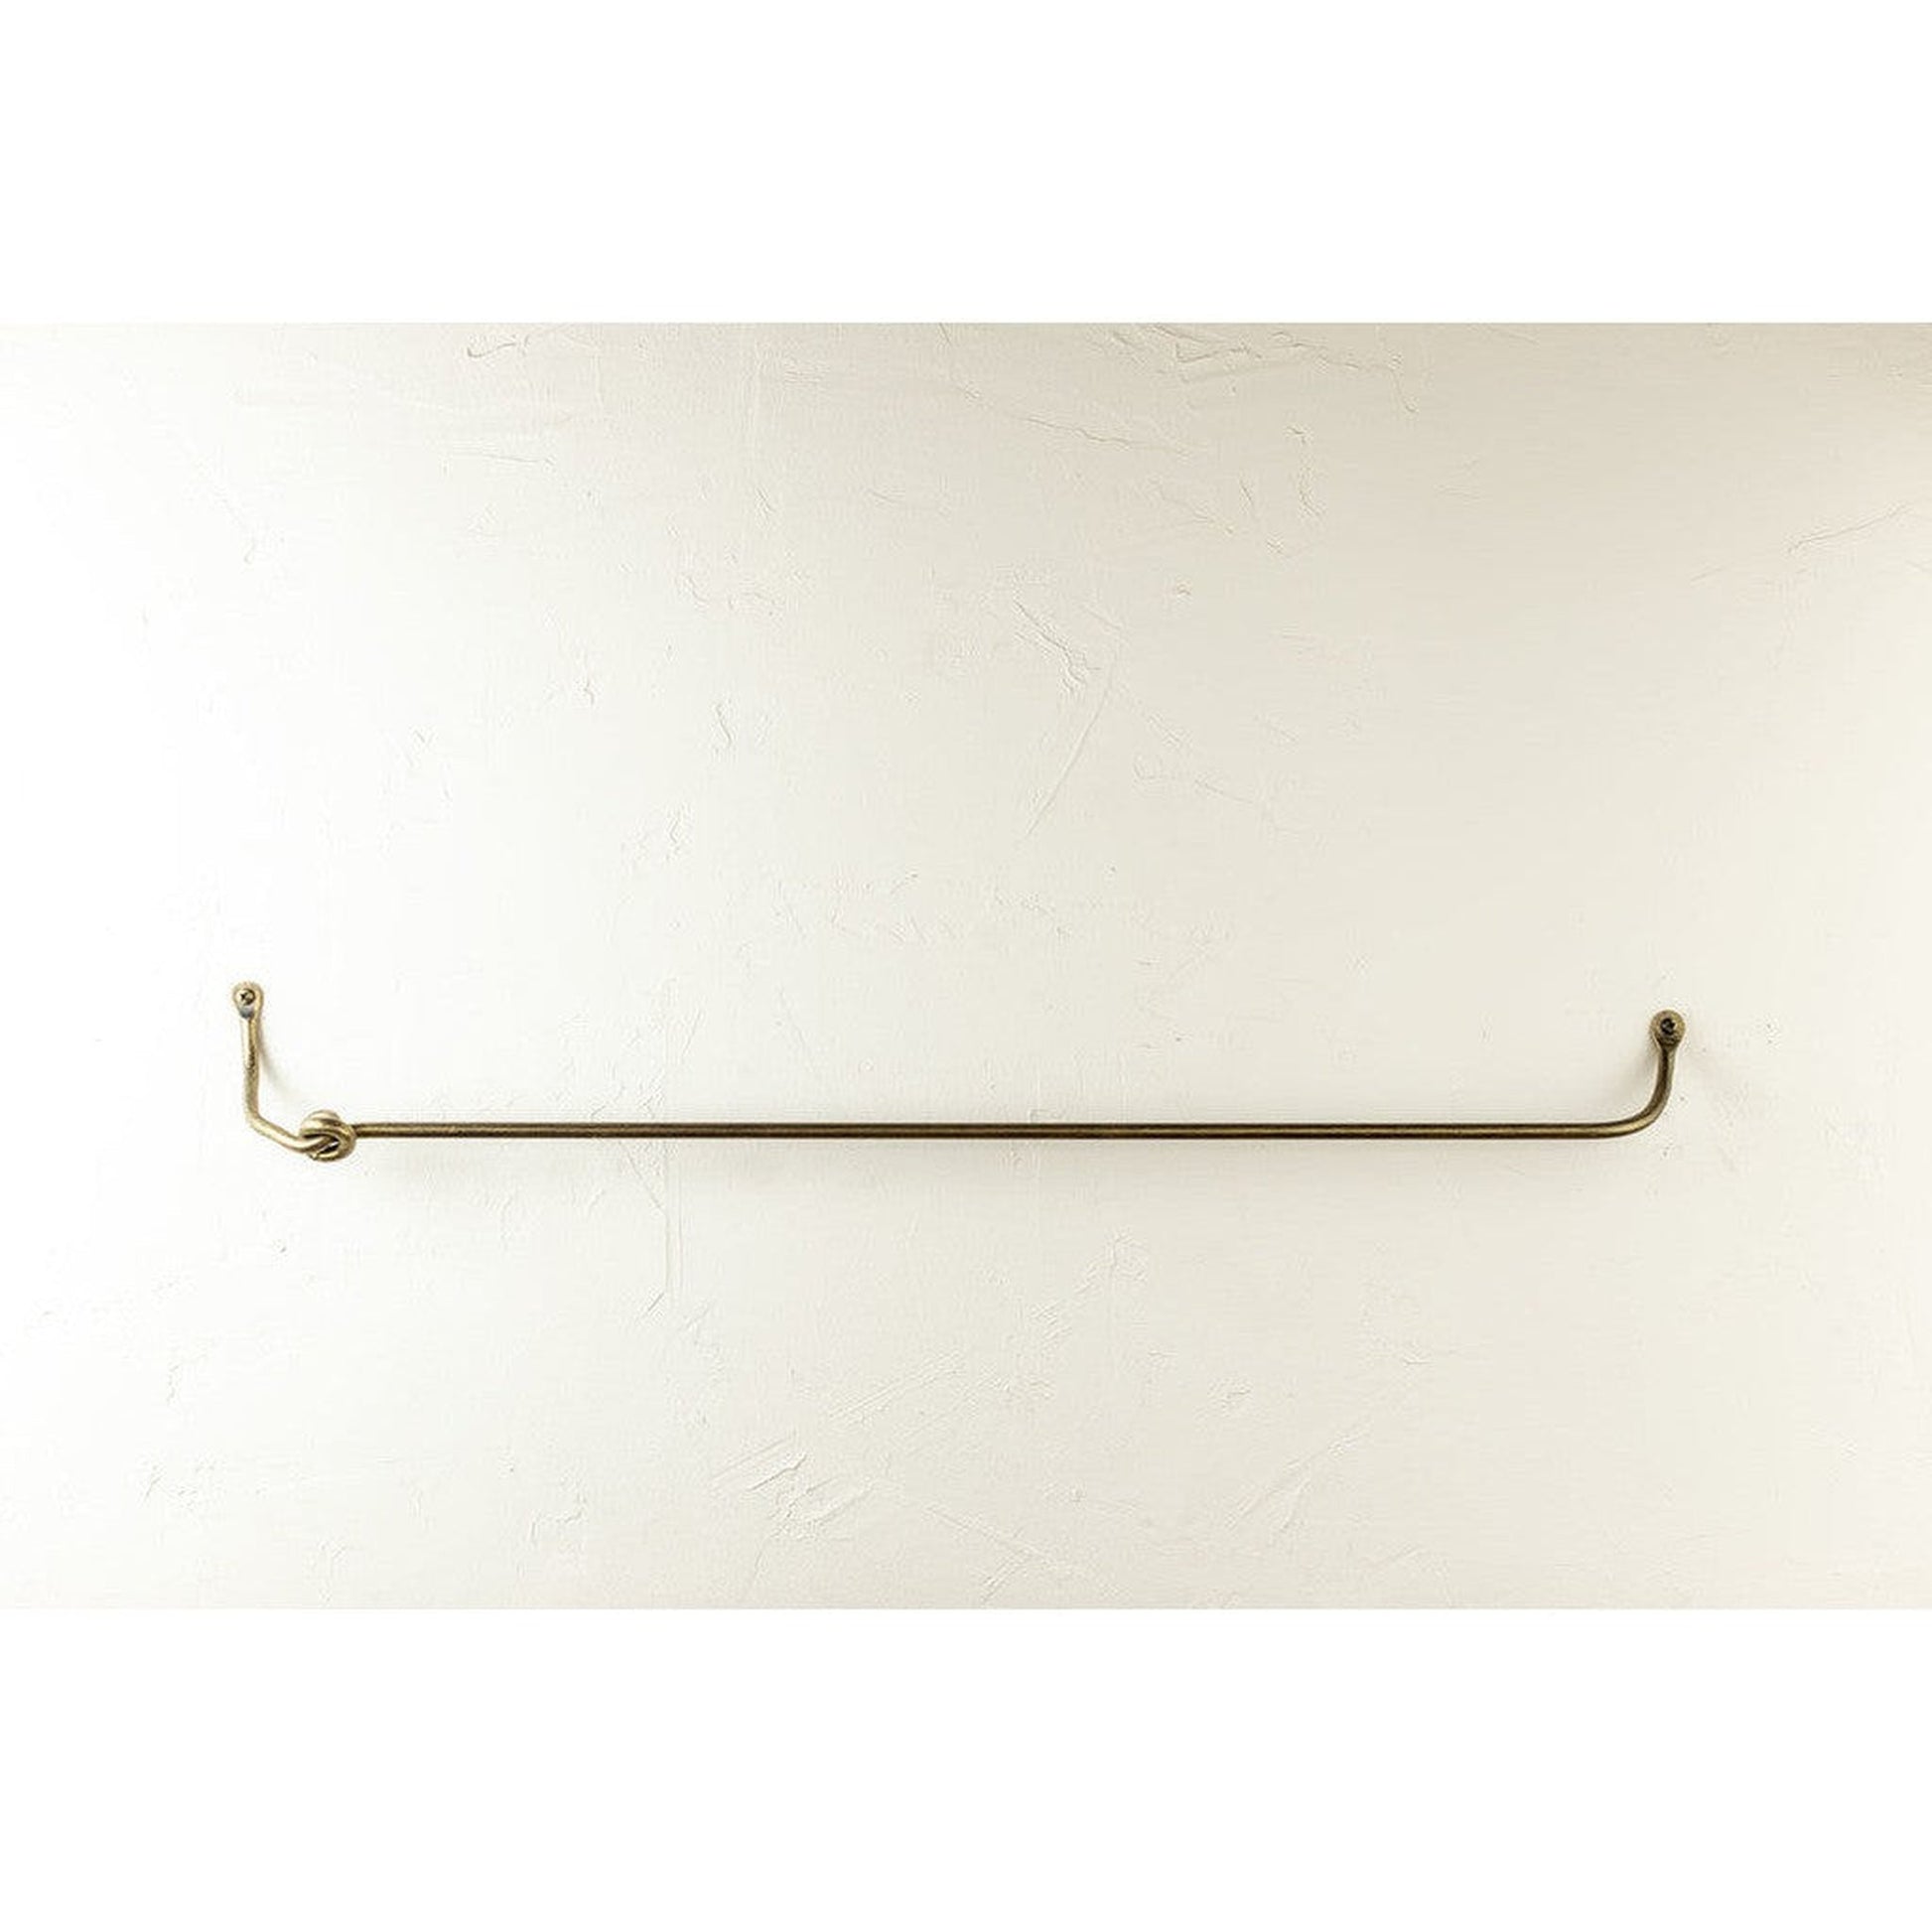 Stone County Ironworks Knot 24" Natural Black Iron Towel Bar With Copper Iron Accent